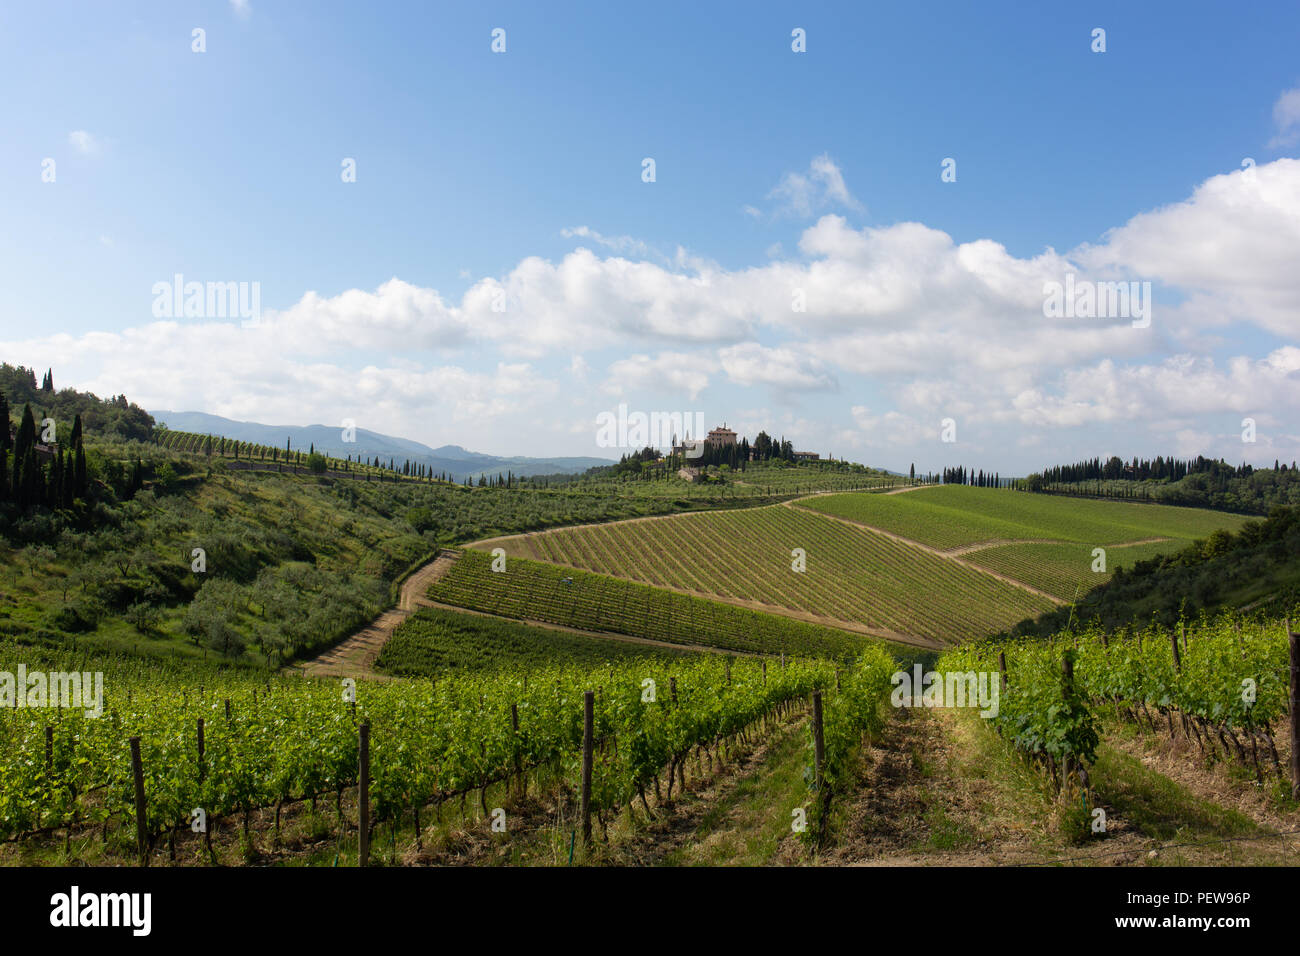 Typical Tuscan landscape, rolling hills with vineyards Stock Photo